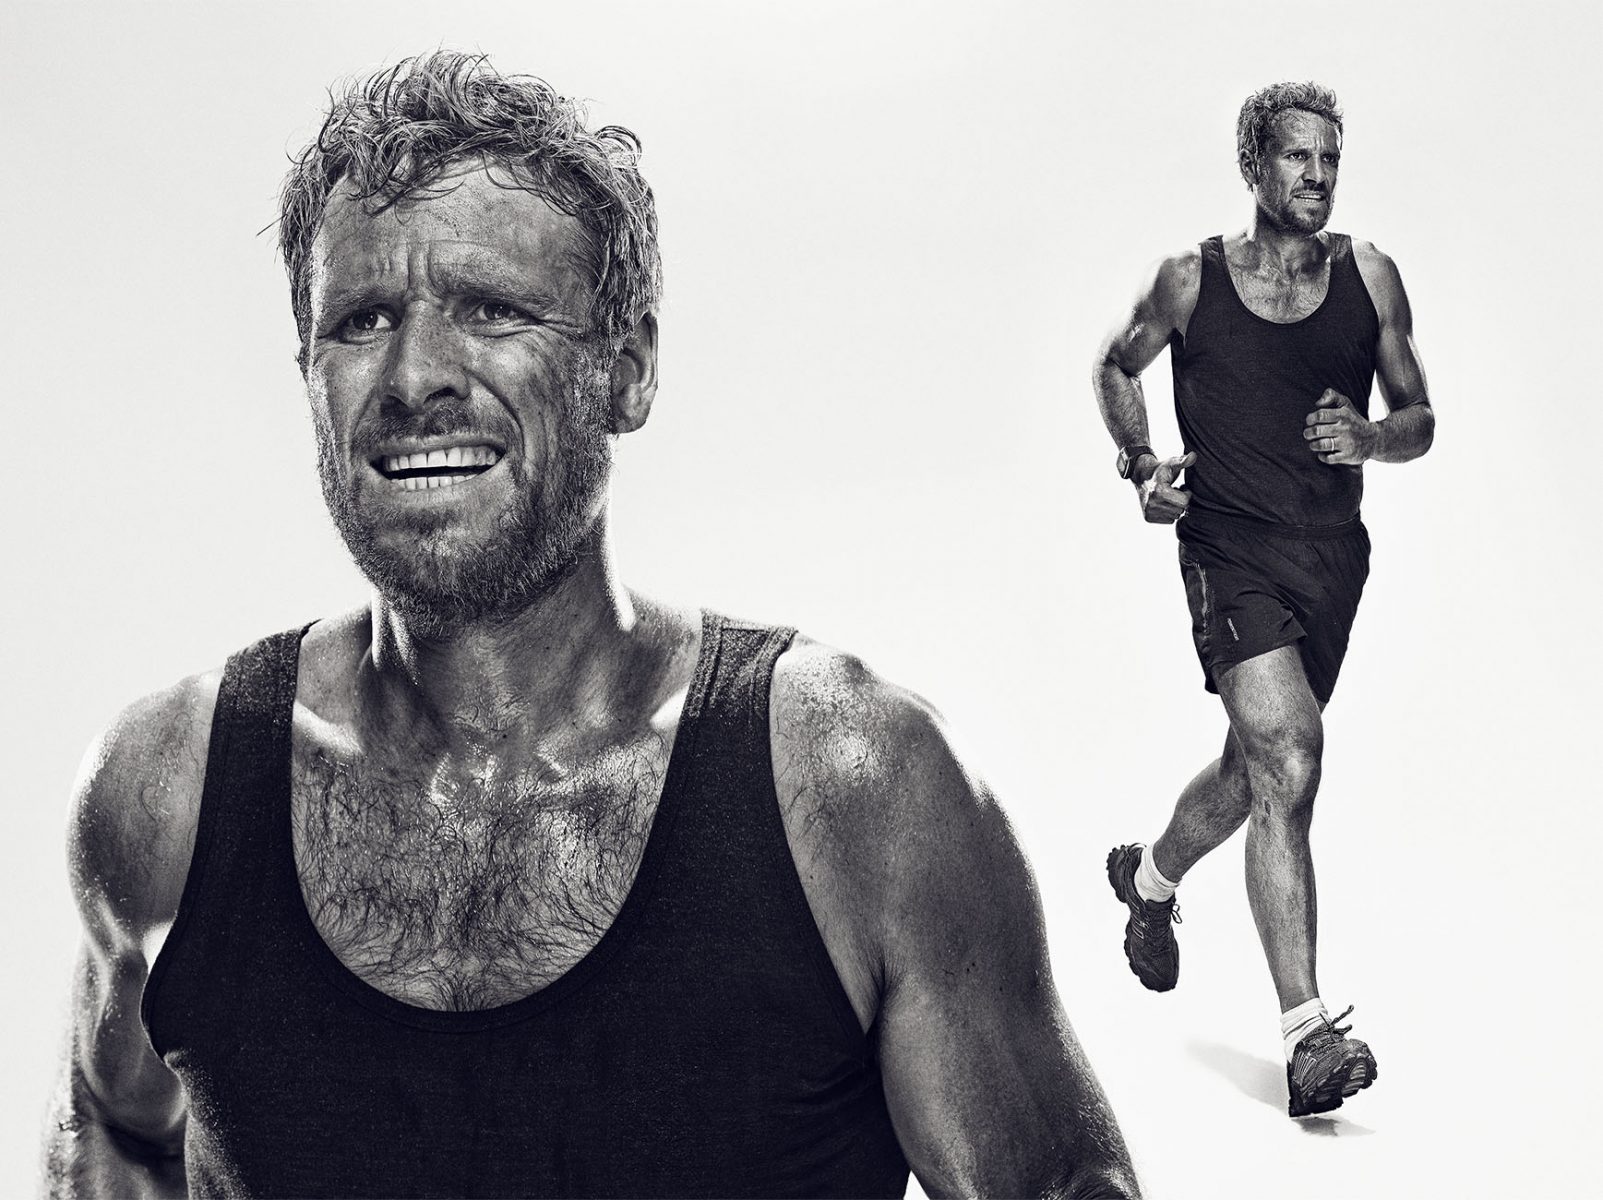 Discovery channel – James Cracknell